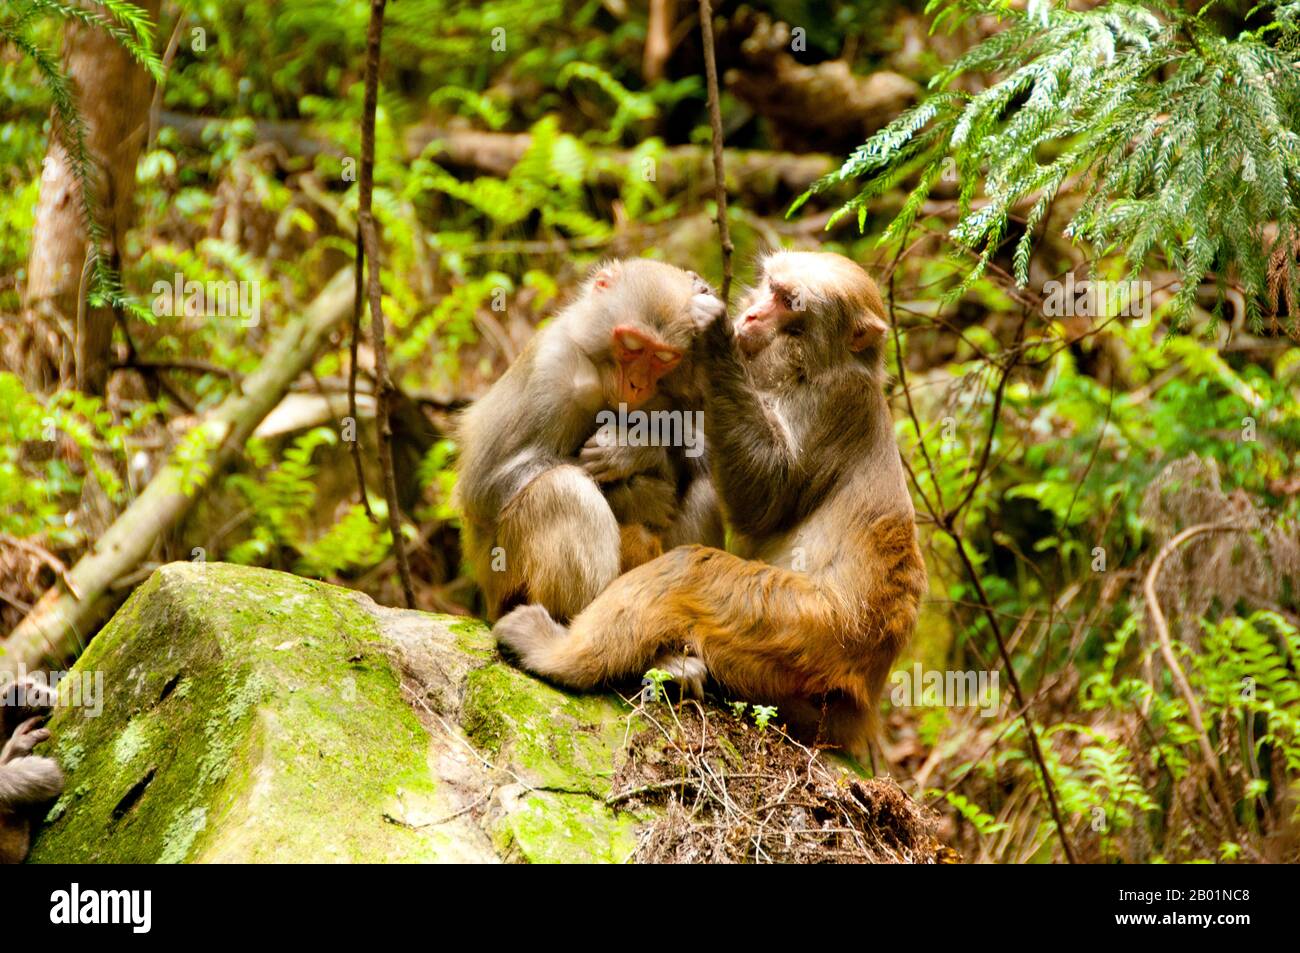 The Rhesus macaque (Macaca mulatta), also called the Rhesus monkey, is brown or grey in color and has a pink face, which is bereft of fur. Its tail is of medium length and averages between 20.7 and 22.9 cm (8.1 and 9.0 in). Adult males measure approximately 53 cm (21 in) on average and weigh about 7.7 kg (17 lb). Females are smaller, averaging 47 cm (19 in) in length and 5.3 kg (12 lb) in weight.  It is listed as Least Concern in the IUCN Red List of Threatened Species in view of its wide distribution, presumed large population, and its tolerance of a broad range of habitats. Native to South, Stock Photo